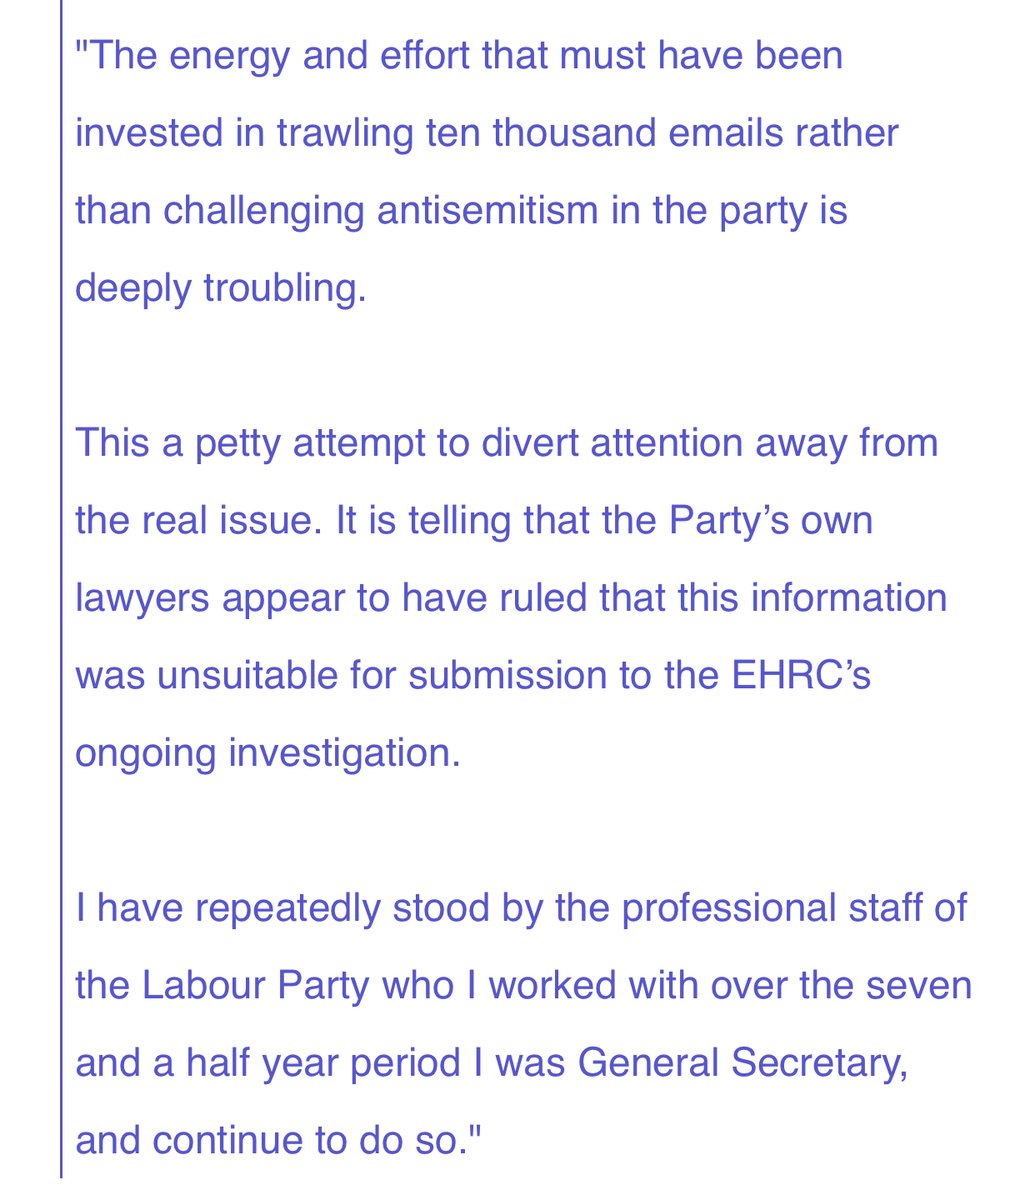 In response to the allegations made in the report, Lord McNicol said it was "telling that the Party's own lawyers appear to have ruled that this information was unsuitable for submission to the the EHRC's ongoing investigation"